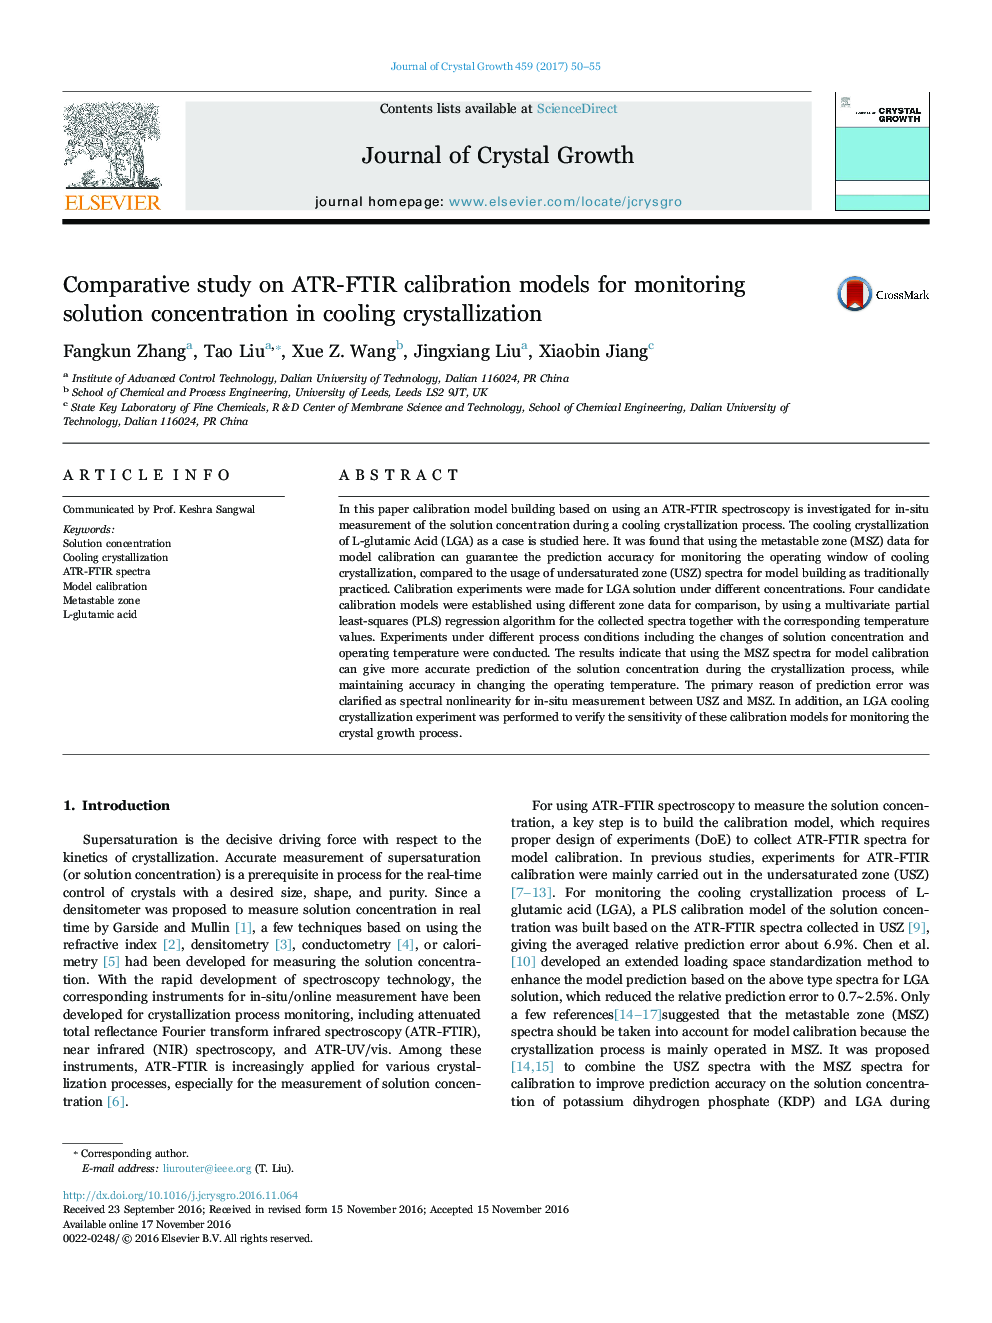 Comparative study on ATR-FTIR calibration models for monitoring solution concentration in cooling crystallization